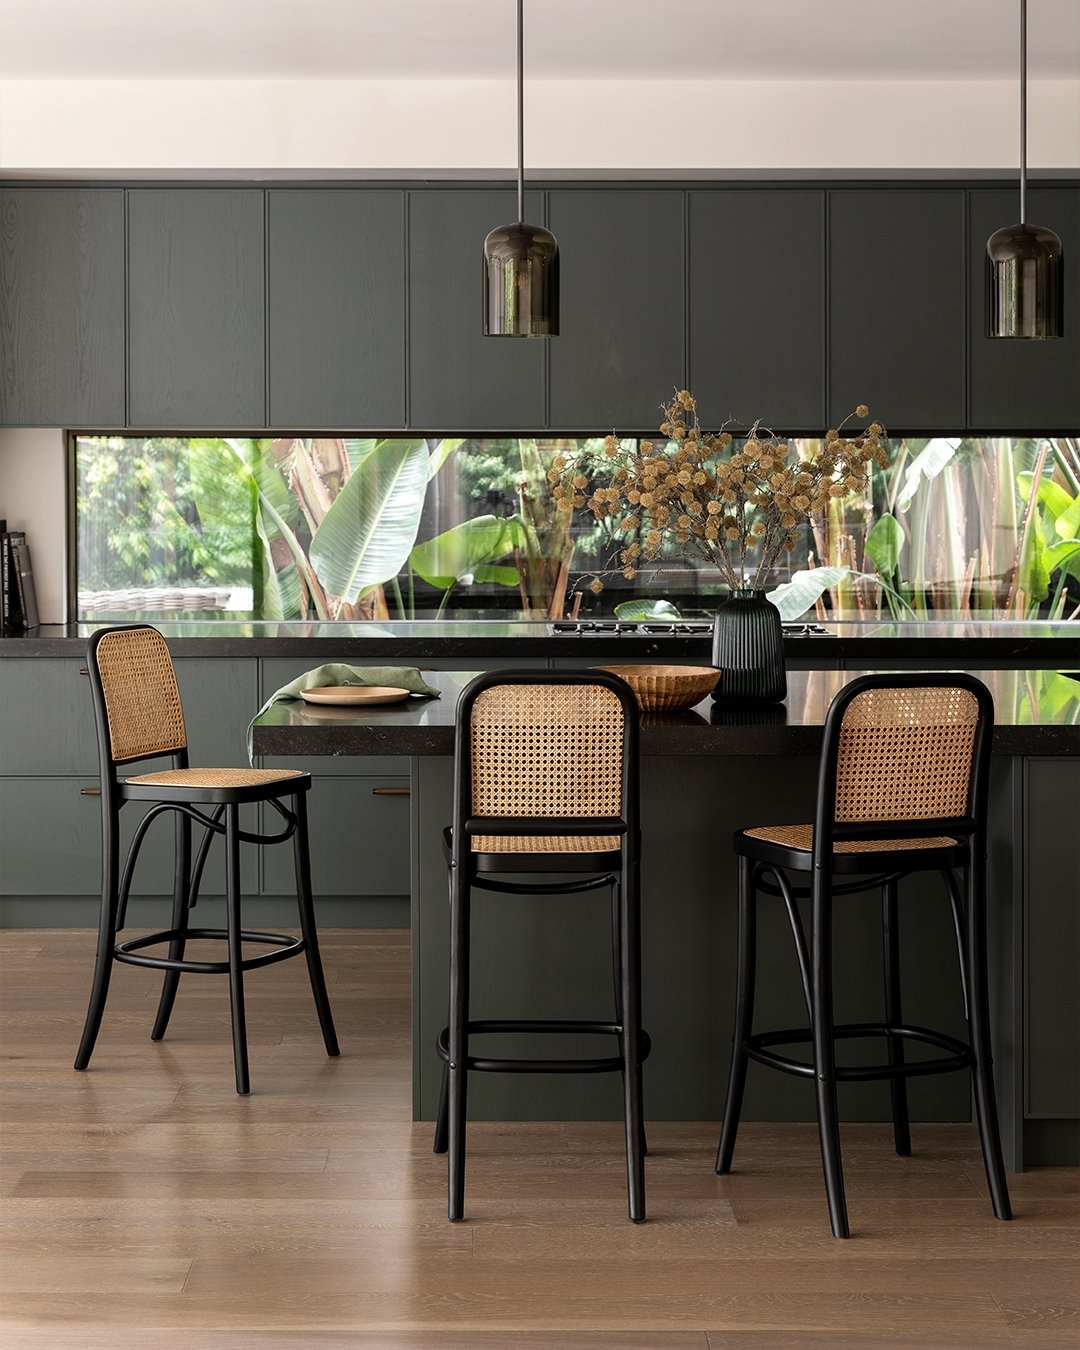 ★ In the kitchen with Selby &ndash; Crafted from Oak with a black stain finish, the Selby Bar Stool Black is a classic shape featuring a natural woven rattan seat and back.

More stock arriving soon! Pre-order today. Link in bio ✧